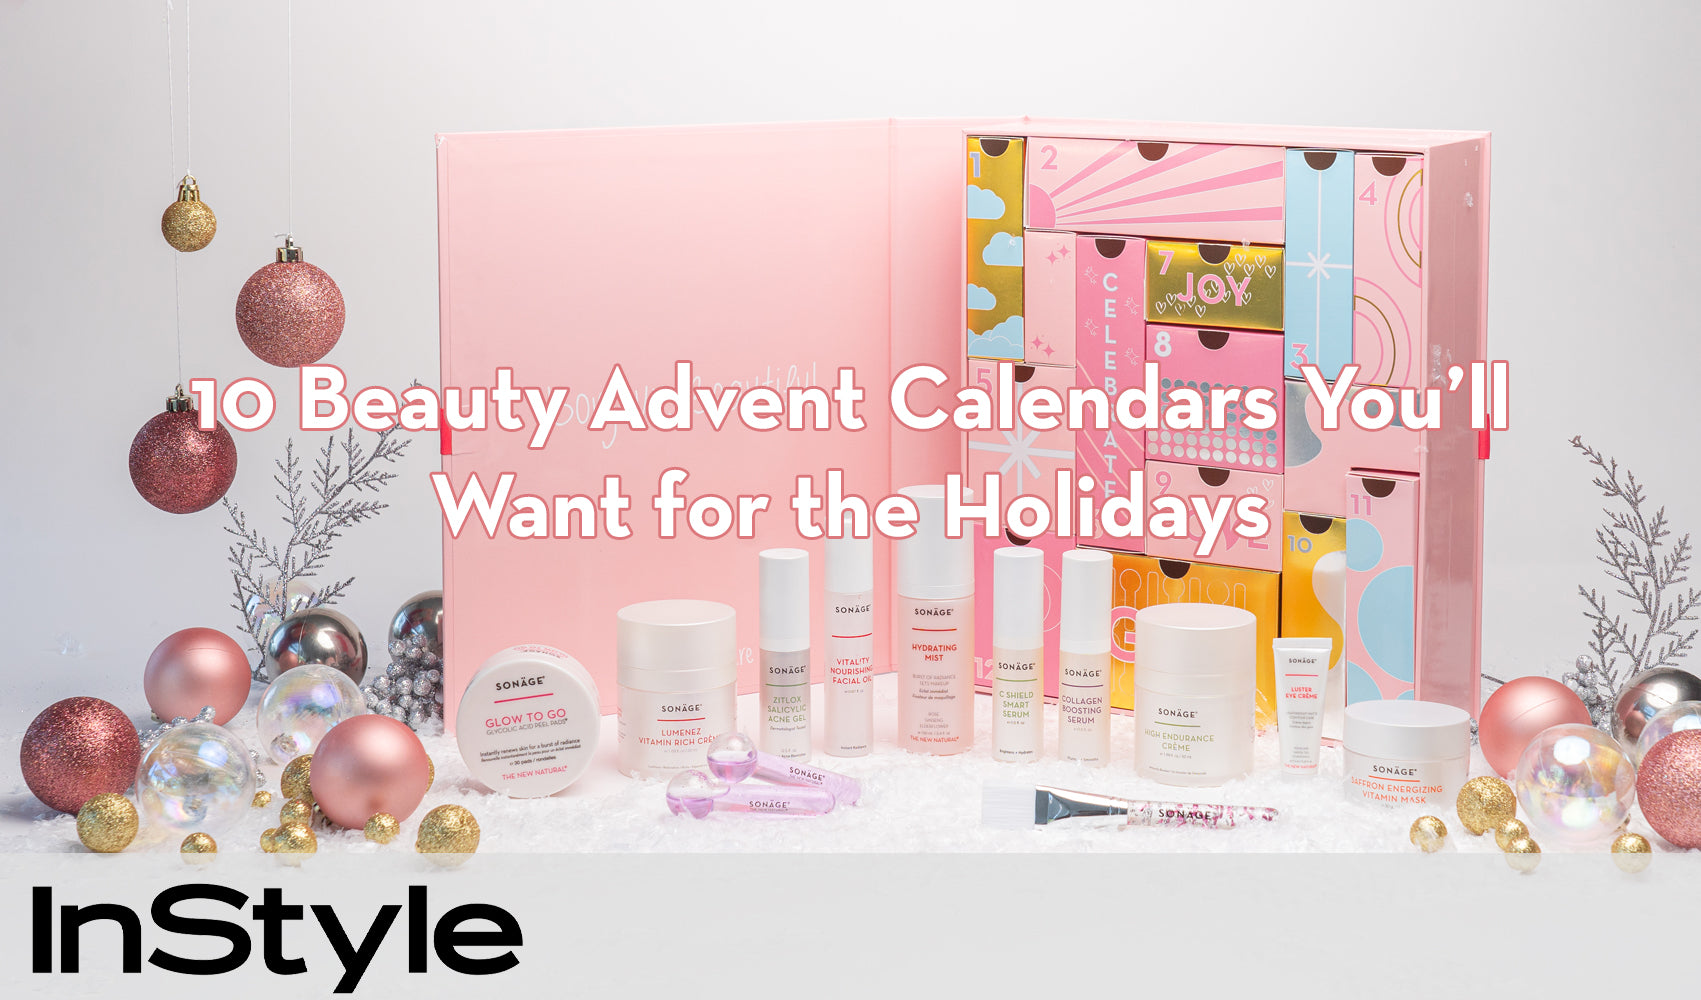 Instyle 10 Beauty Advent Calendar's You'll Want for the Holidays